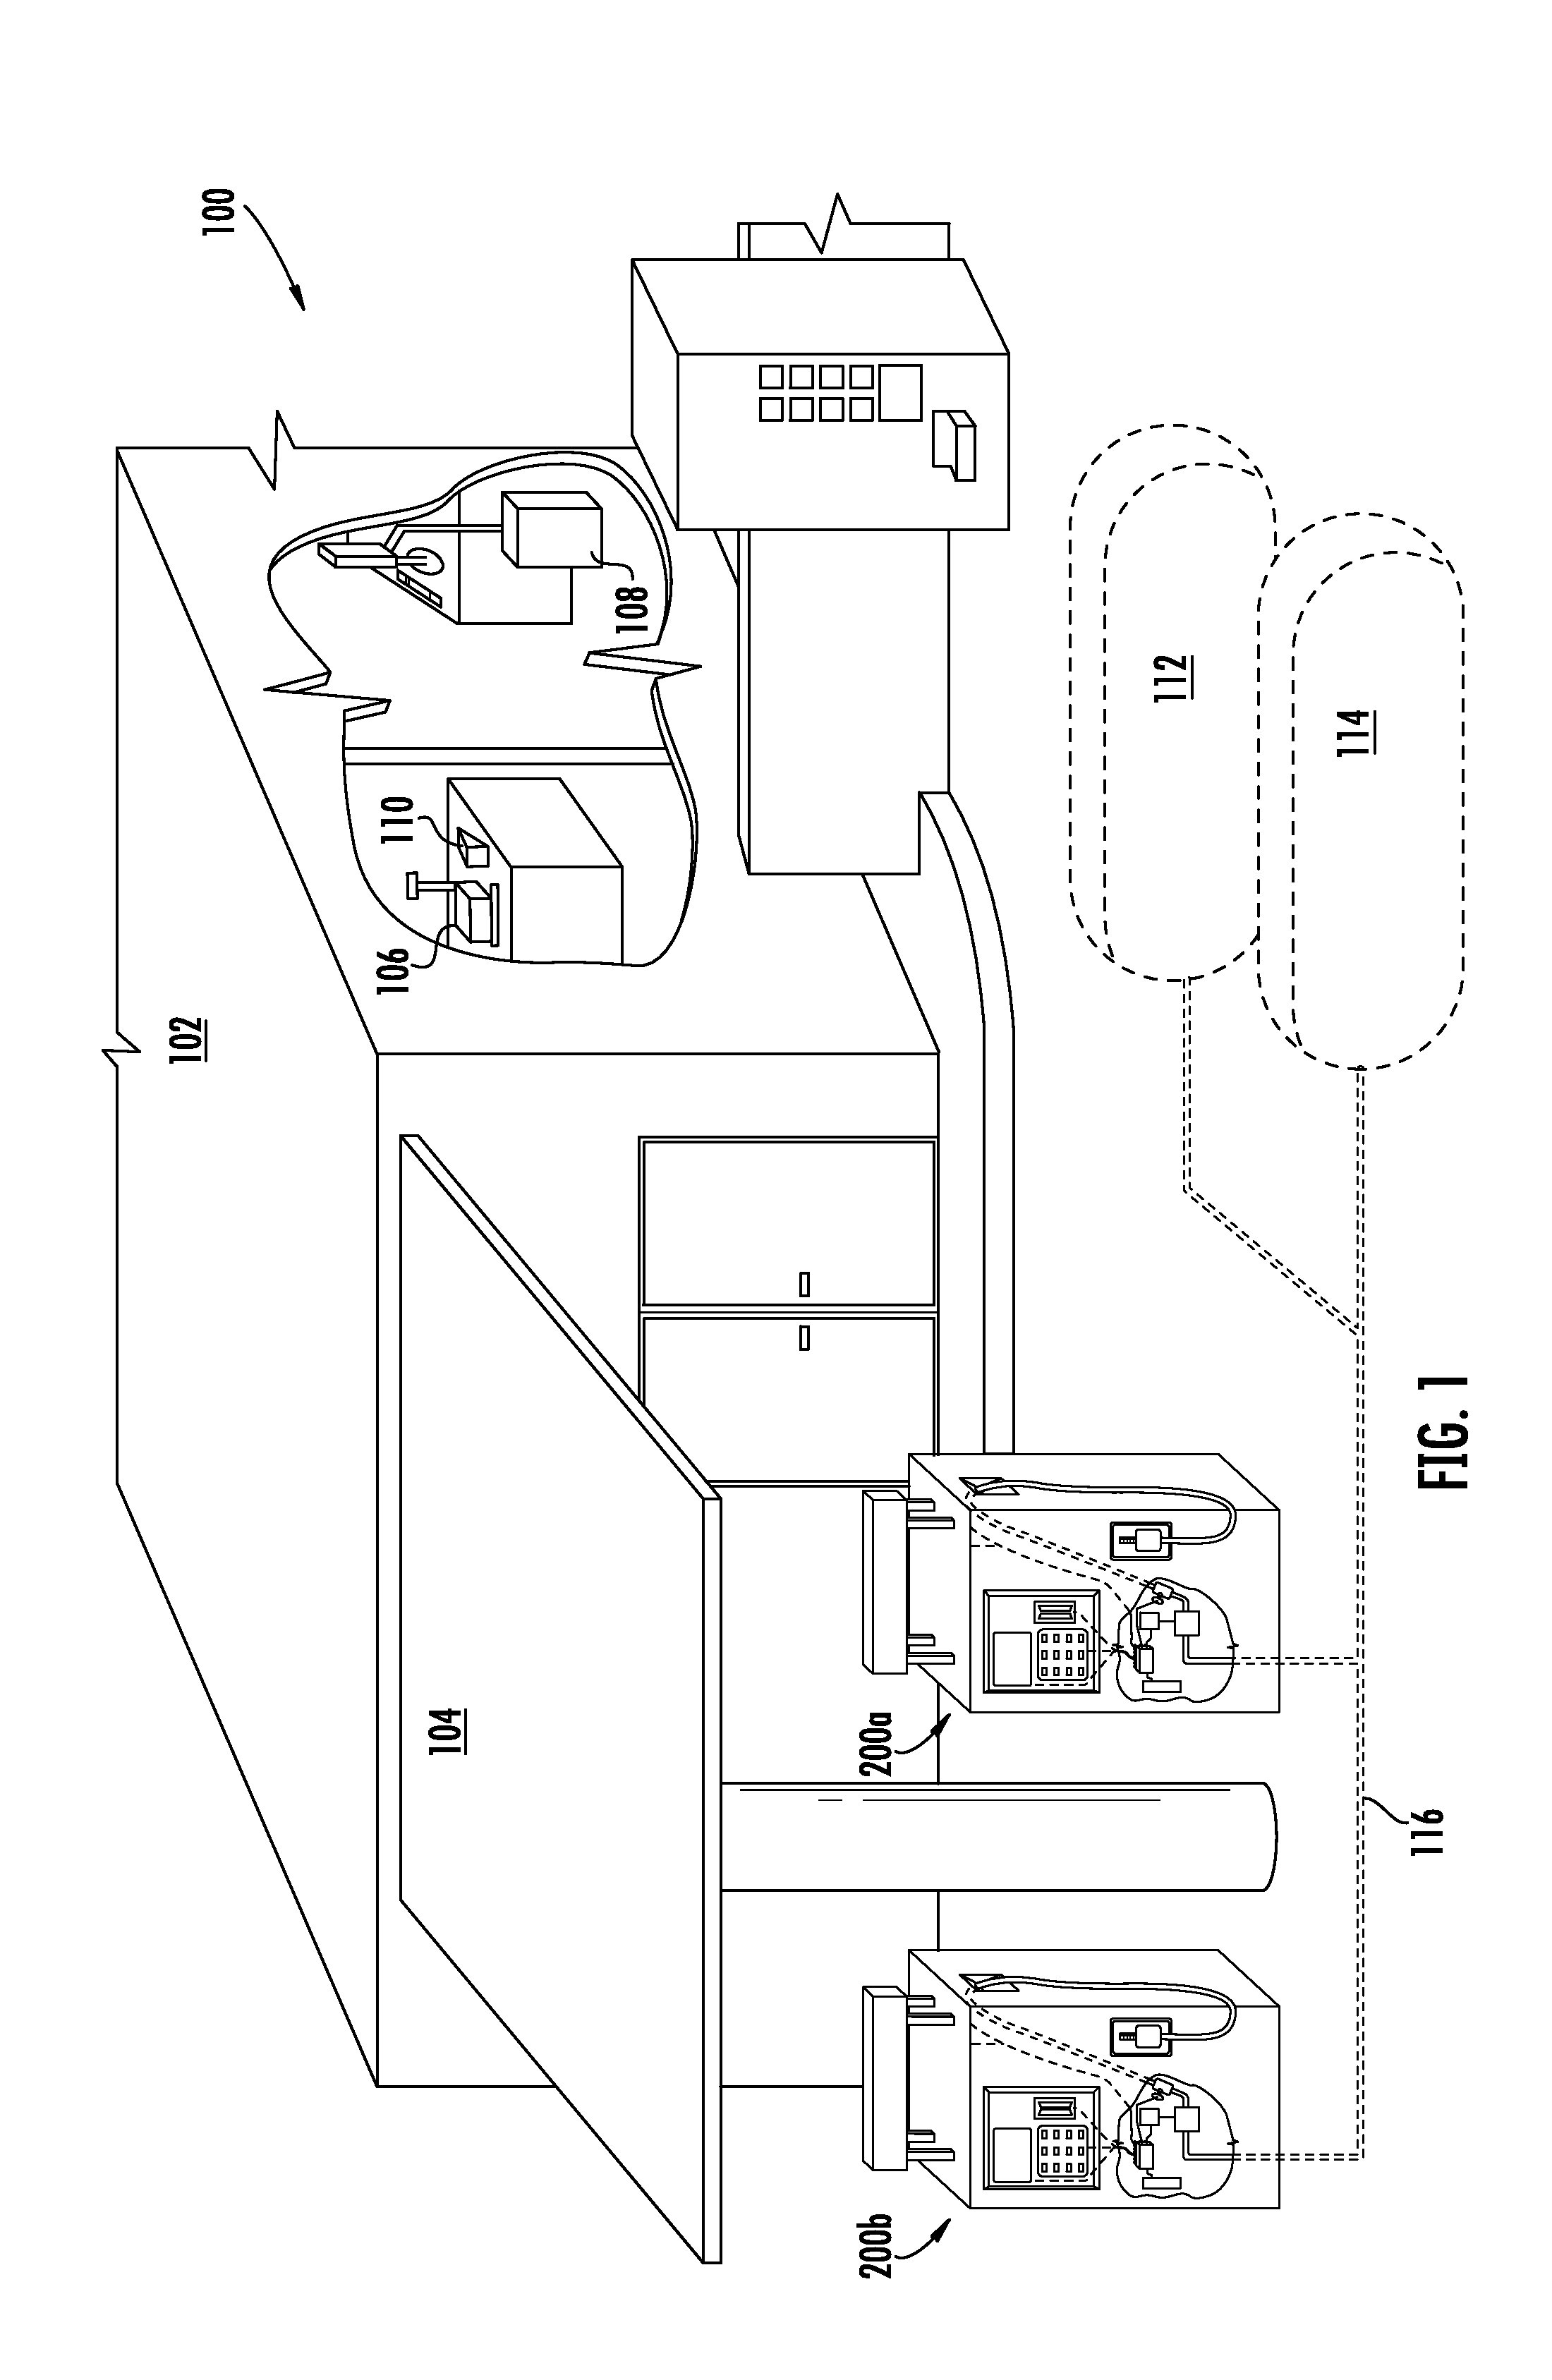 Fuel dispenser payment system and method